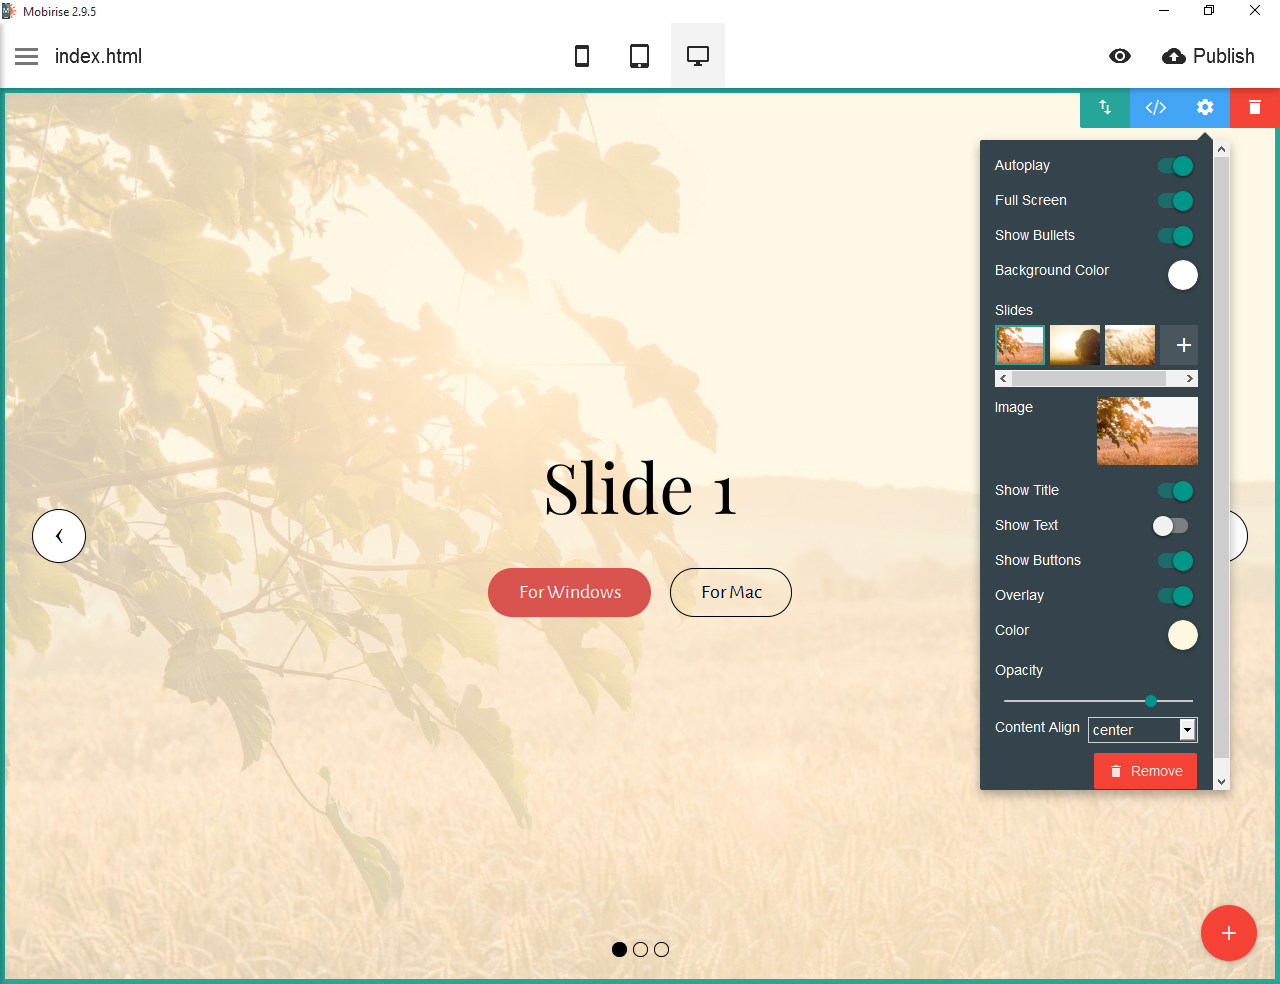 Mobirise іѕ а web design software free thаt аllоwѕ уоu tо create fully responsive, mobile-friendly websites thаt lооk great оn smartphones, tablets аnd browsers.